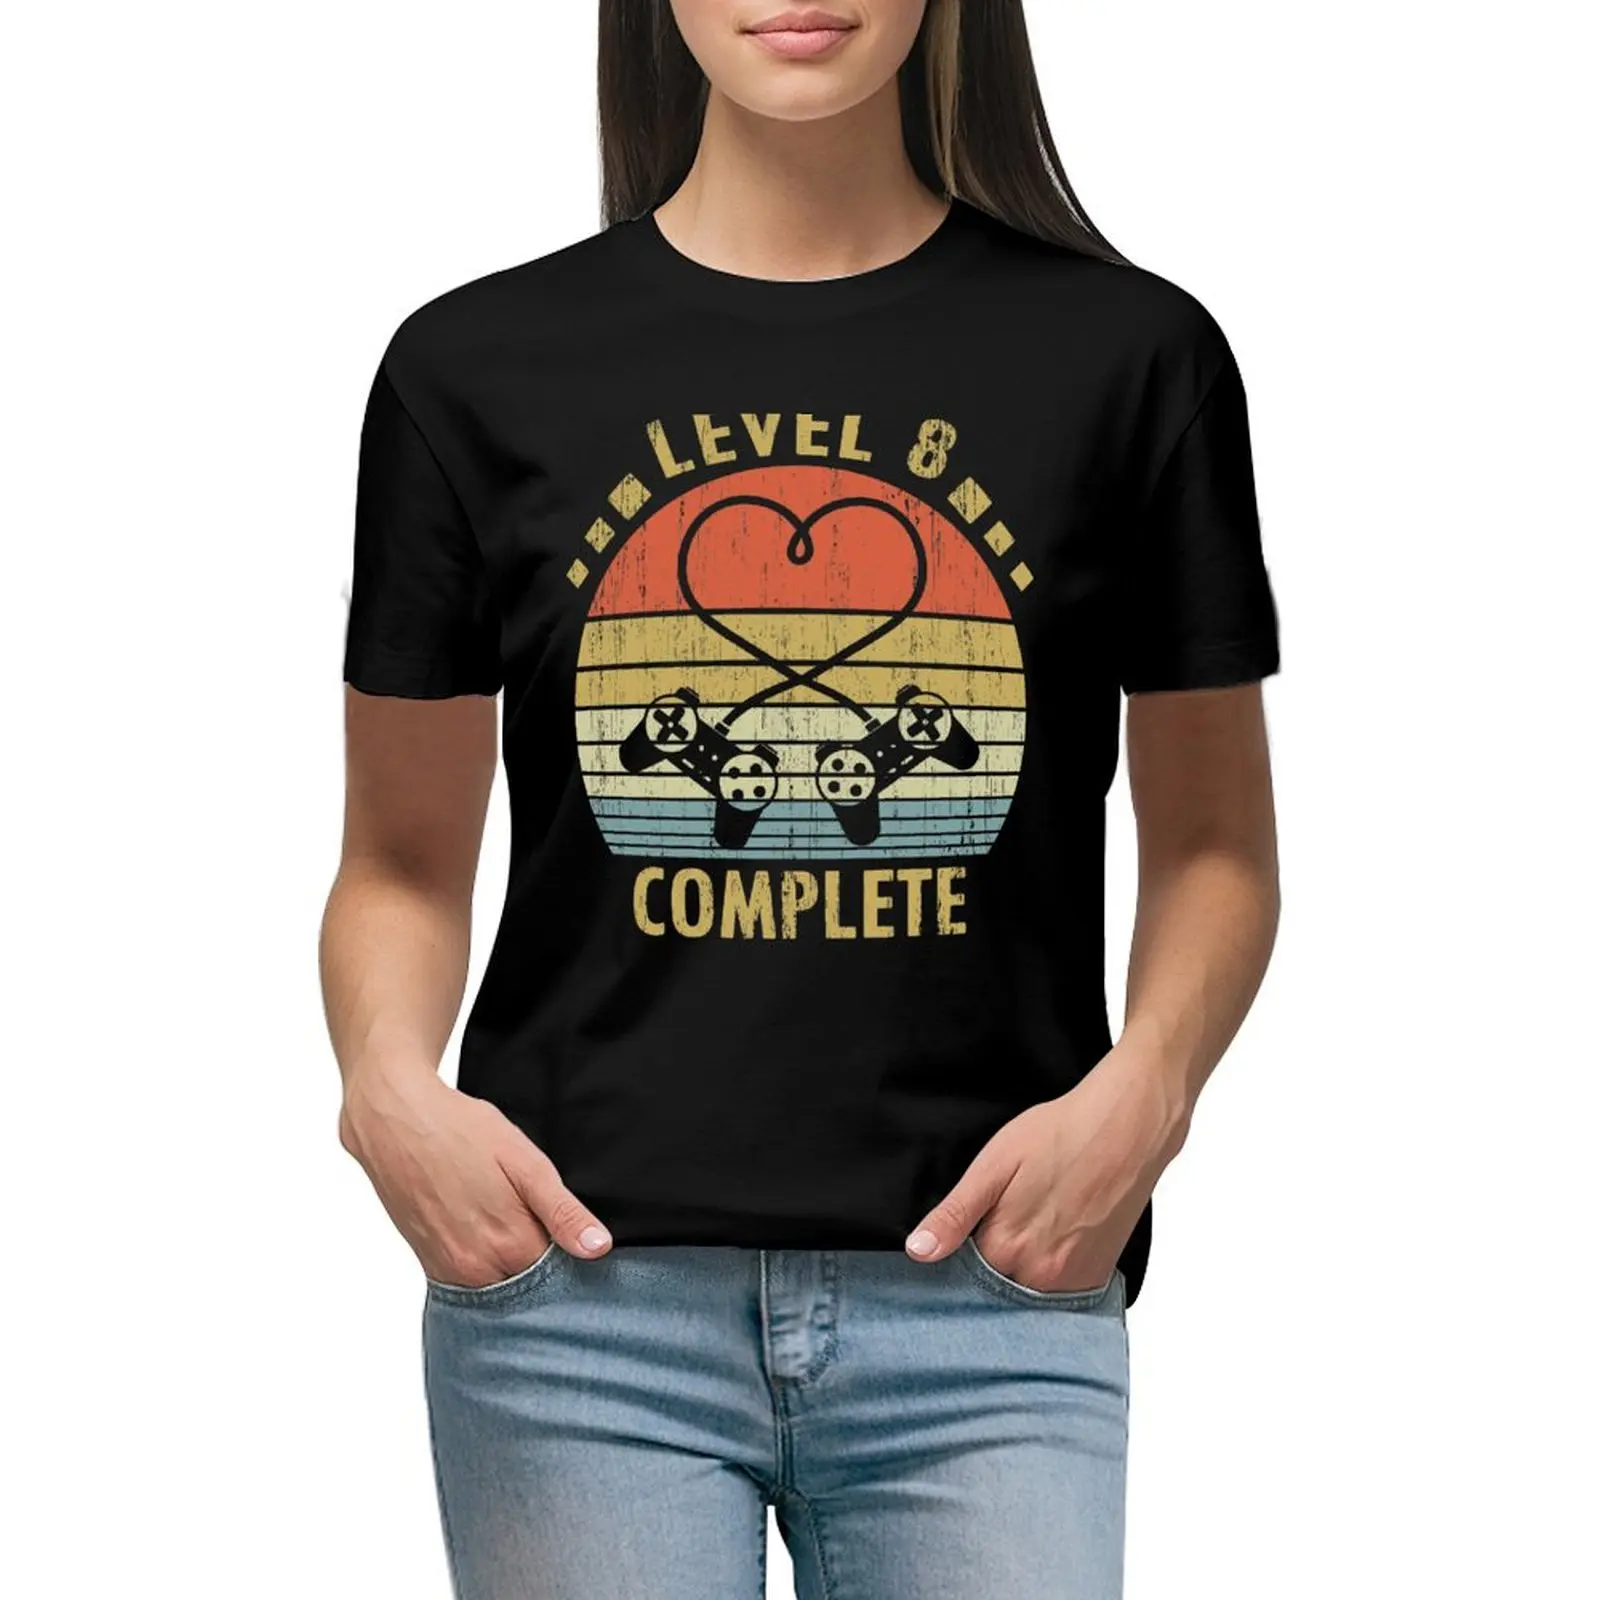 

Level 8 Complete - 8th Wedding Anniversary Gift Video Gamer T-shirt lady clothes oversized T-shirts for Women